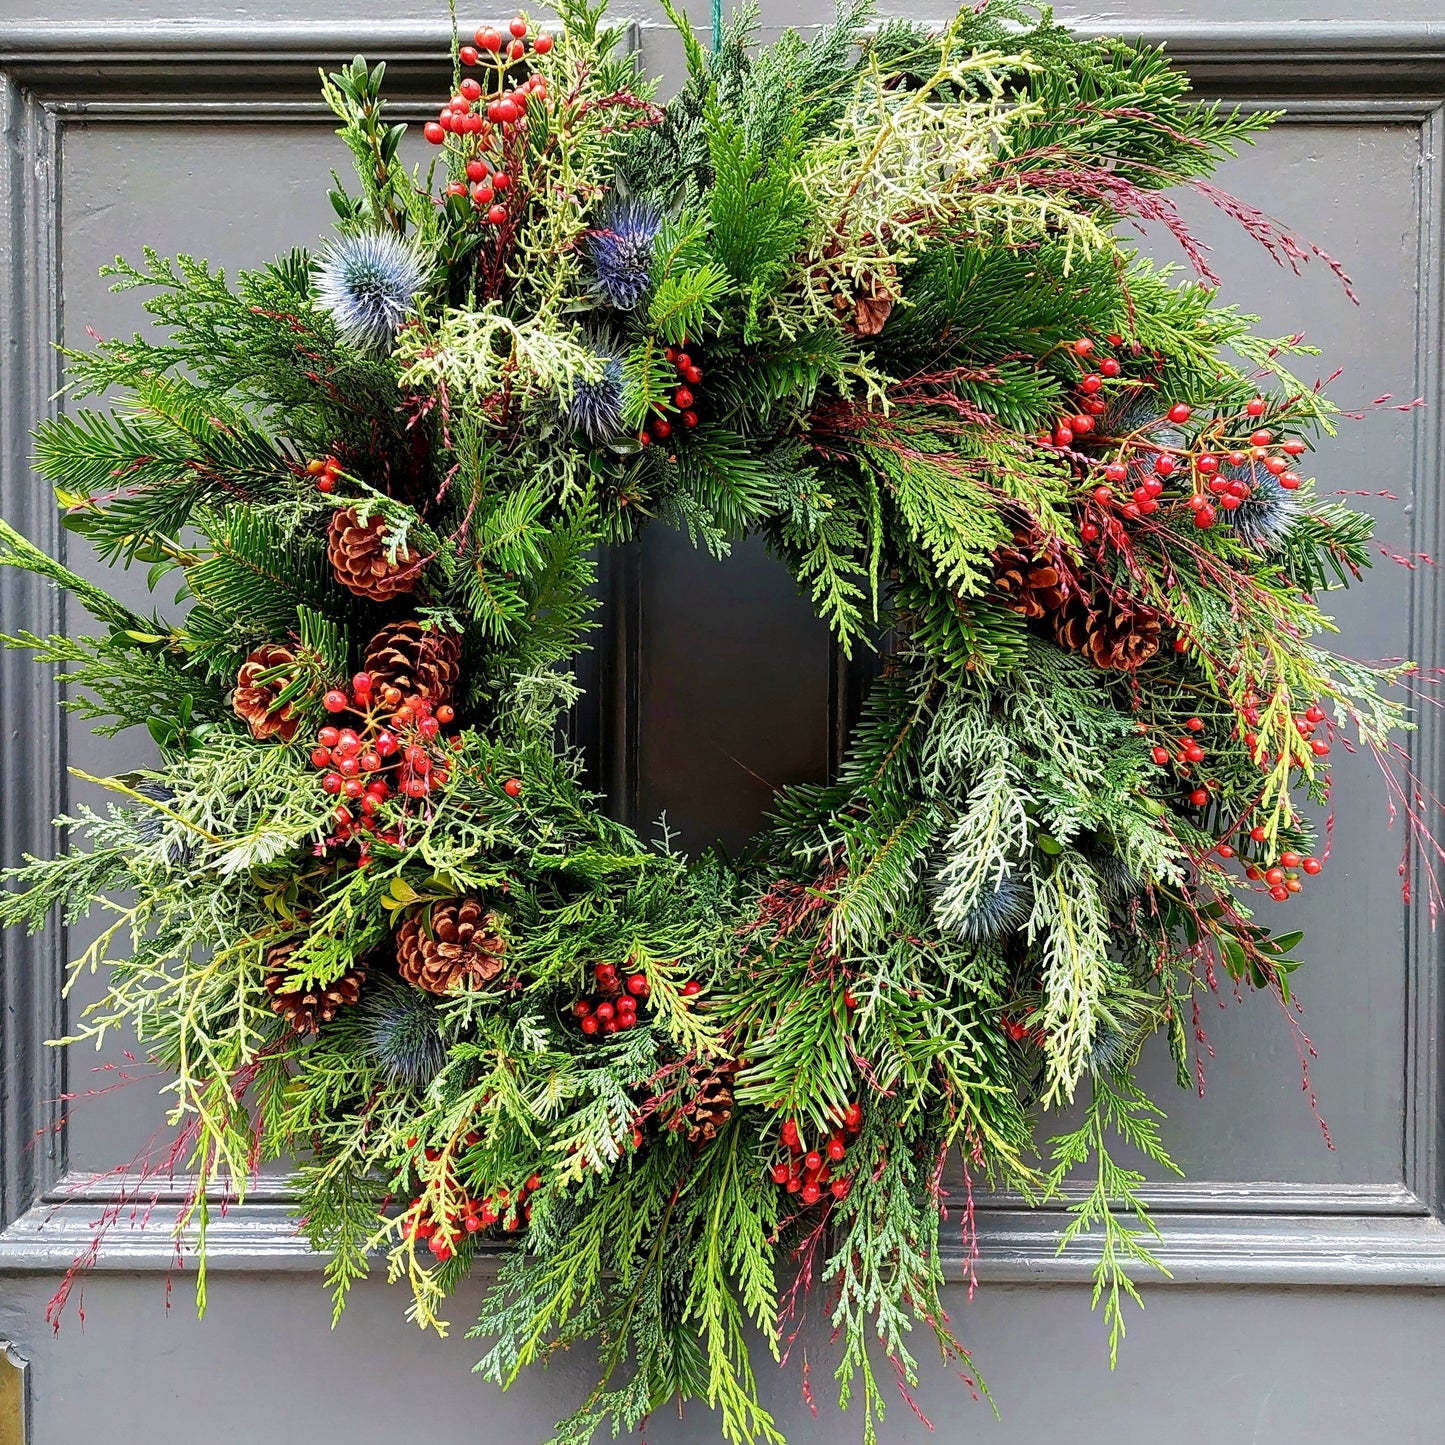 Christmas Wreath Workshop Tuesday 5th December 6.00pm-8.00pm